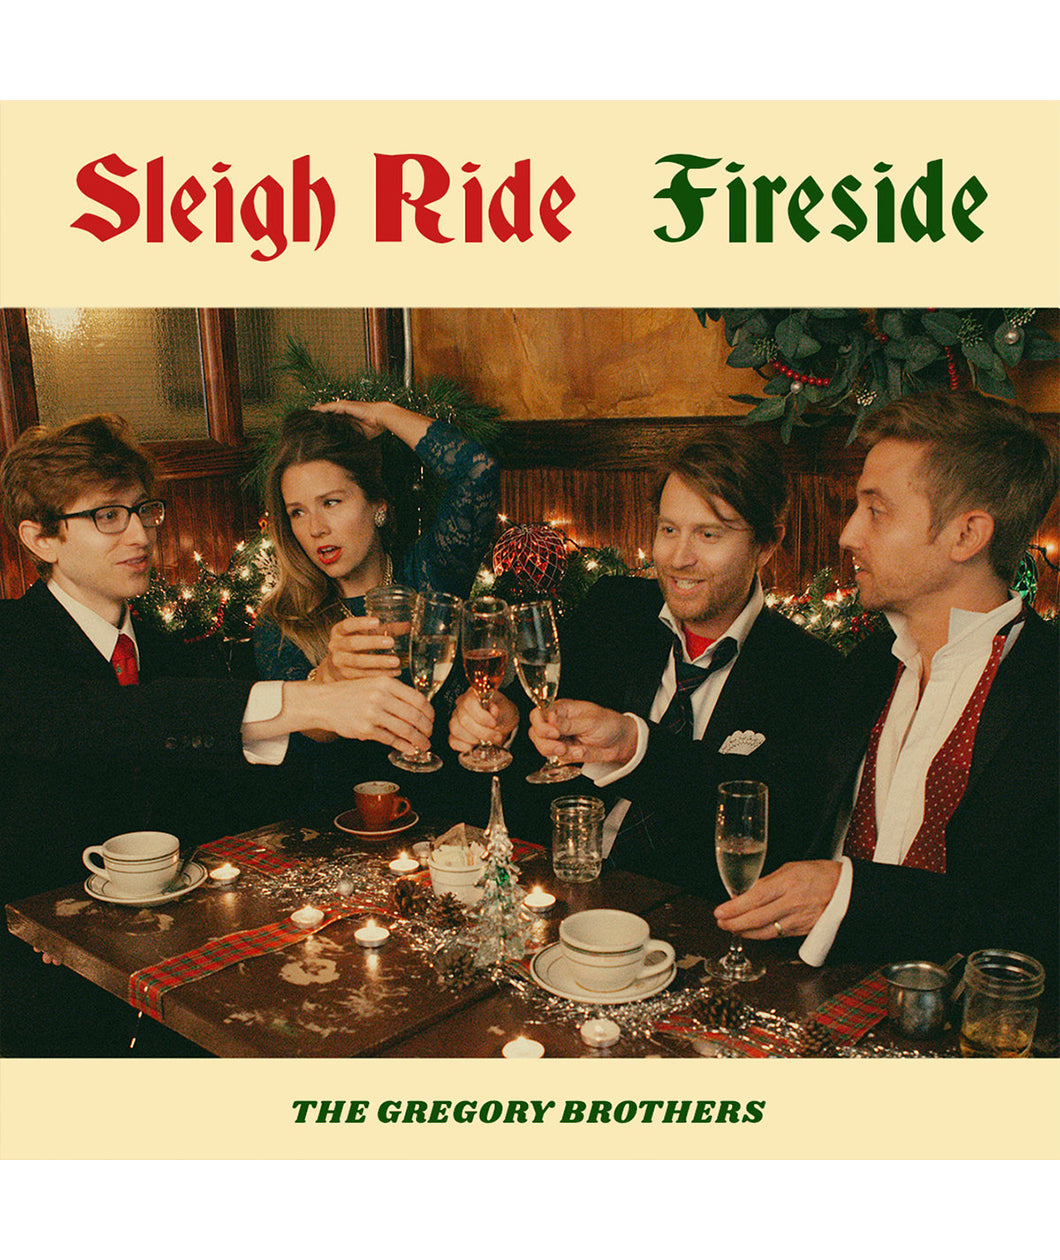 An album cover featuring four people posed in suits and a dress, sitting around a festive table, clinking glasses. On the cover it reads 